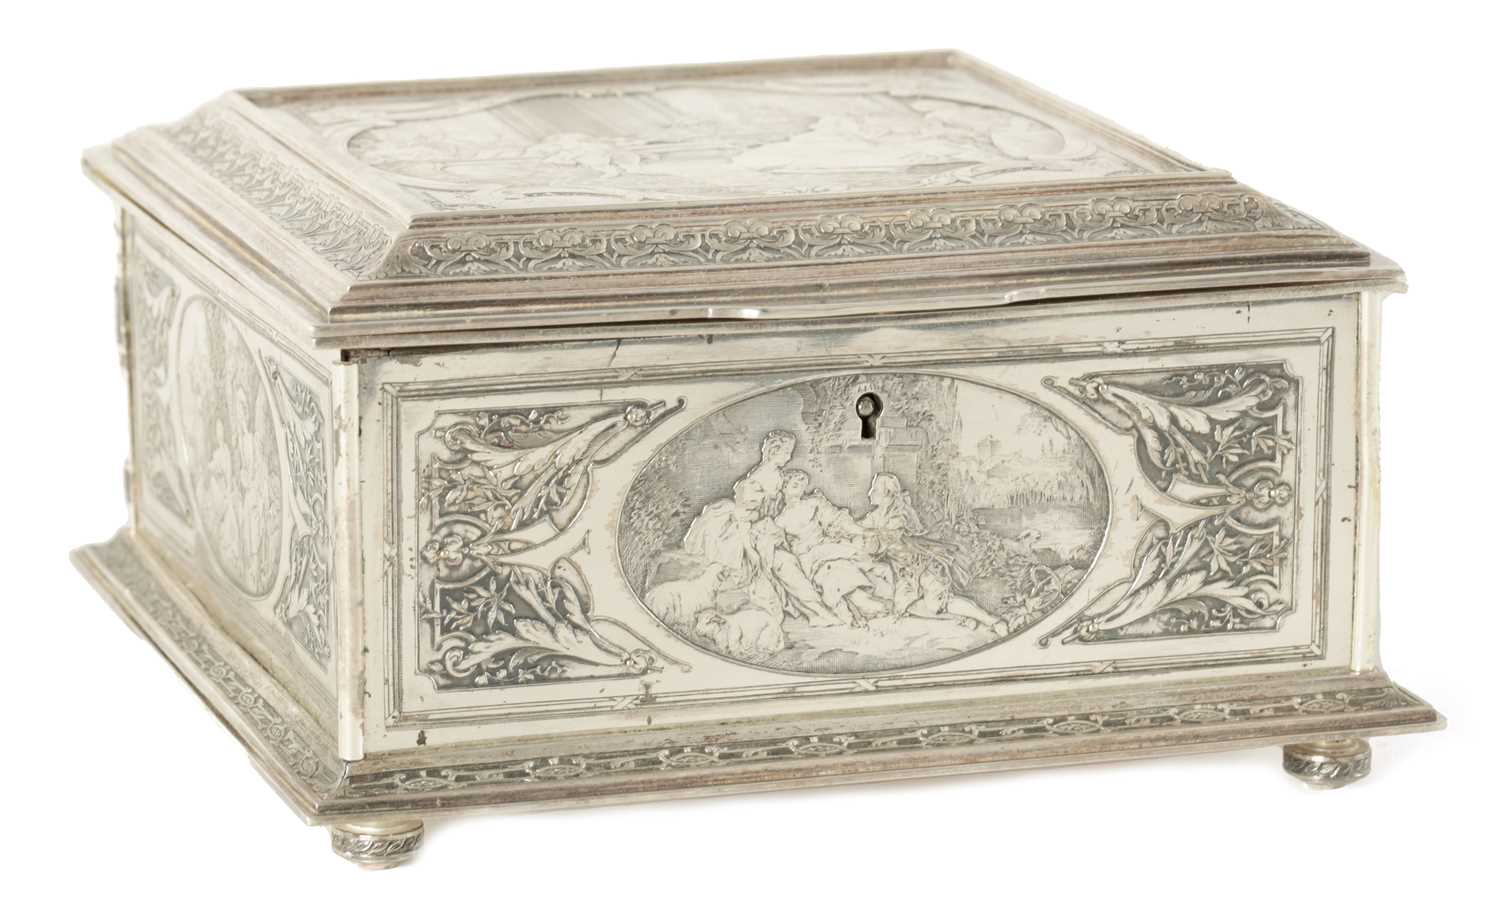 A LATE 19TH CENTURY SILVER PLATED JEWELLERY CASKET DEPICTING MOZART - Image 2 of 16